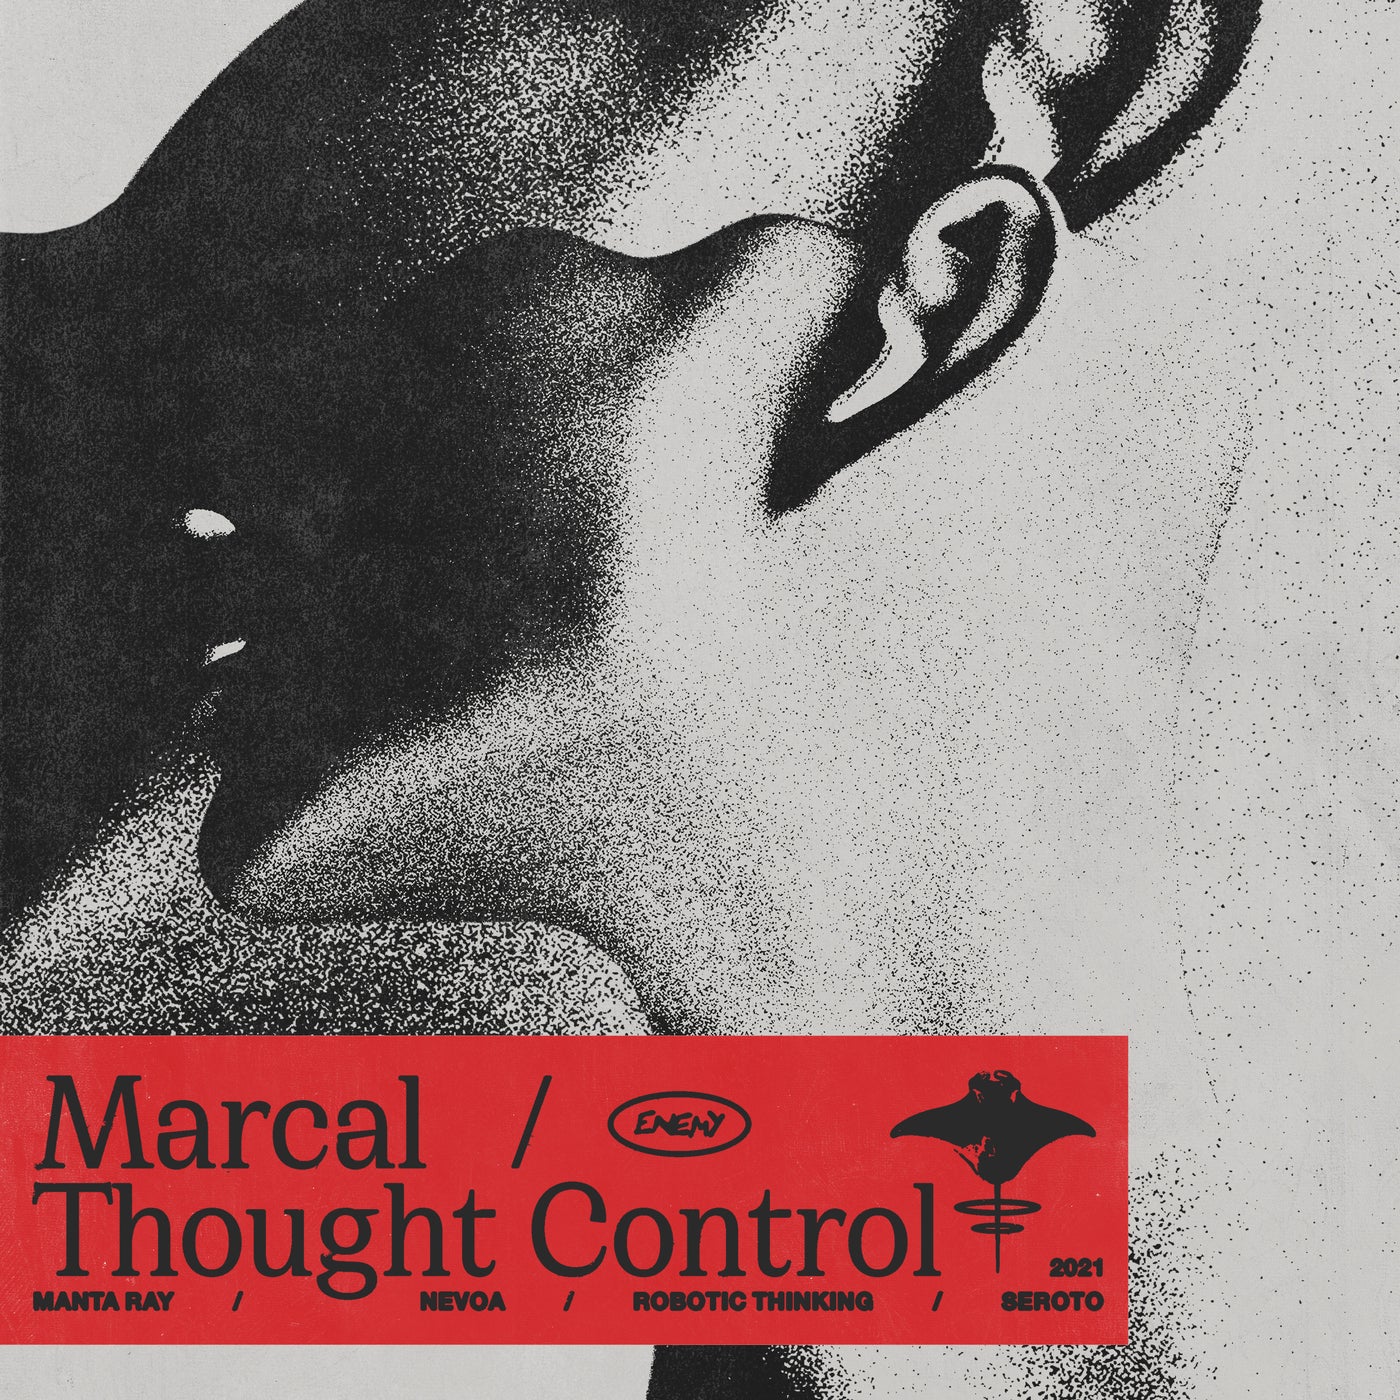 Marcal - Thought Control [NME009]